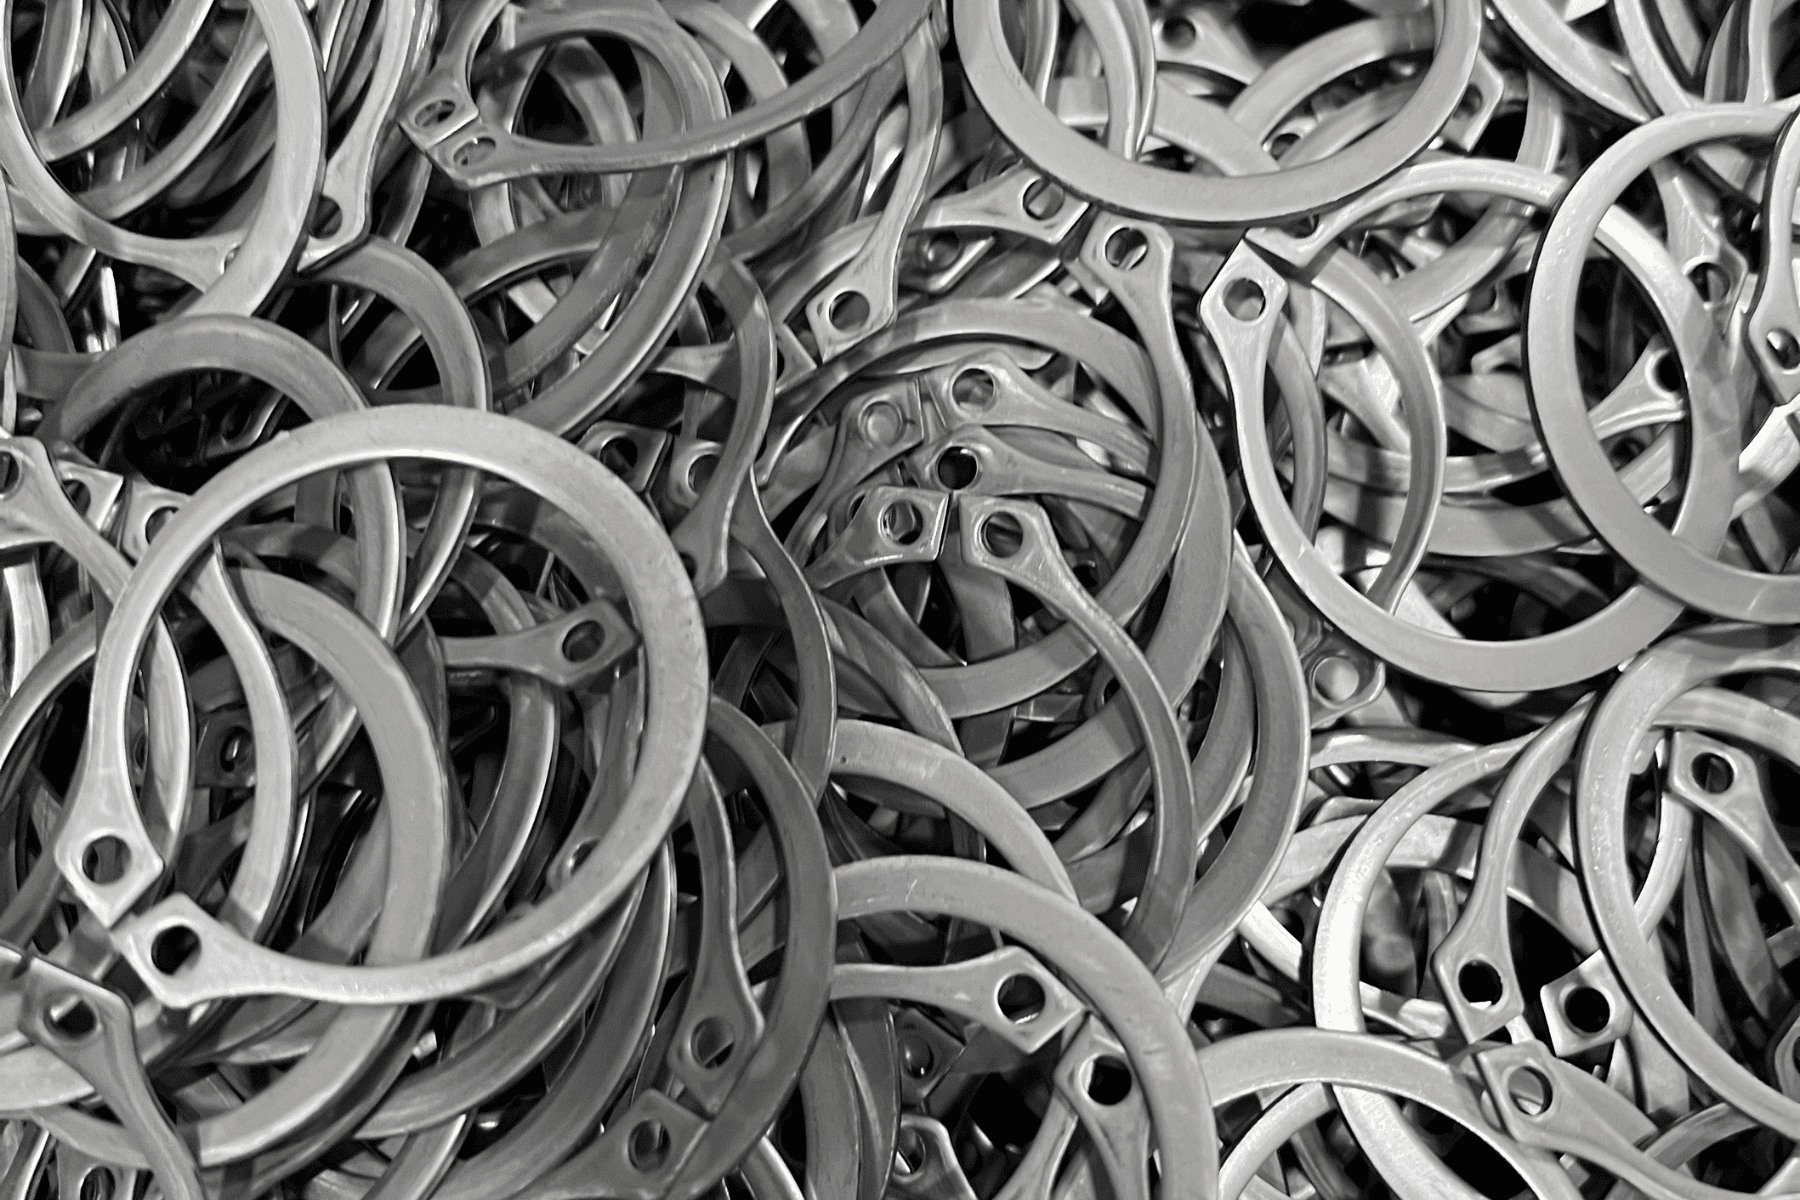 Materials & Finishes for Tapered and Constant Section Retaining Rings